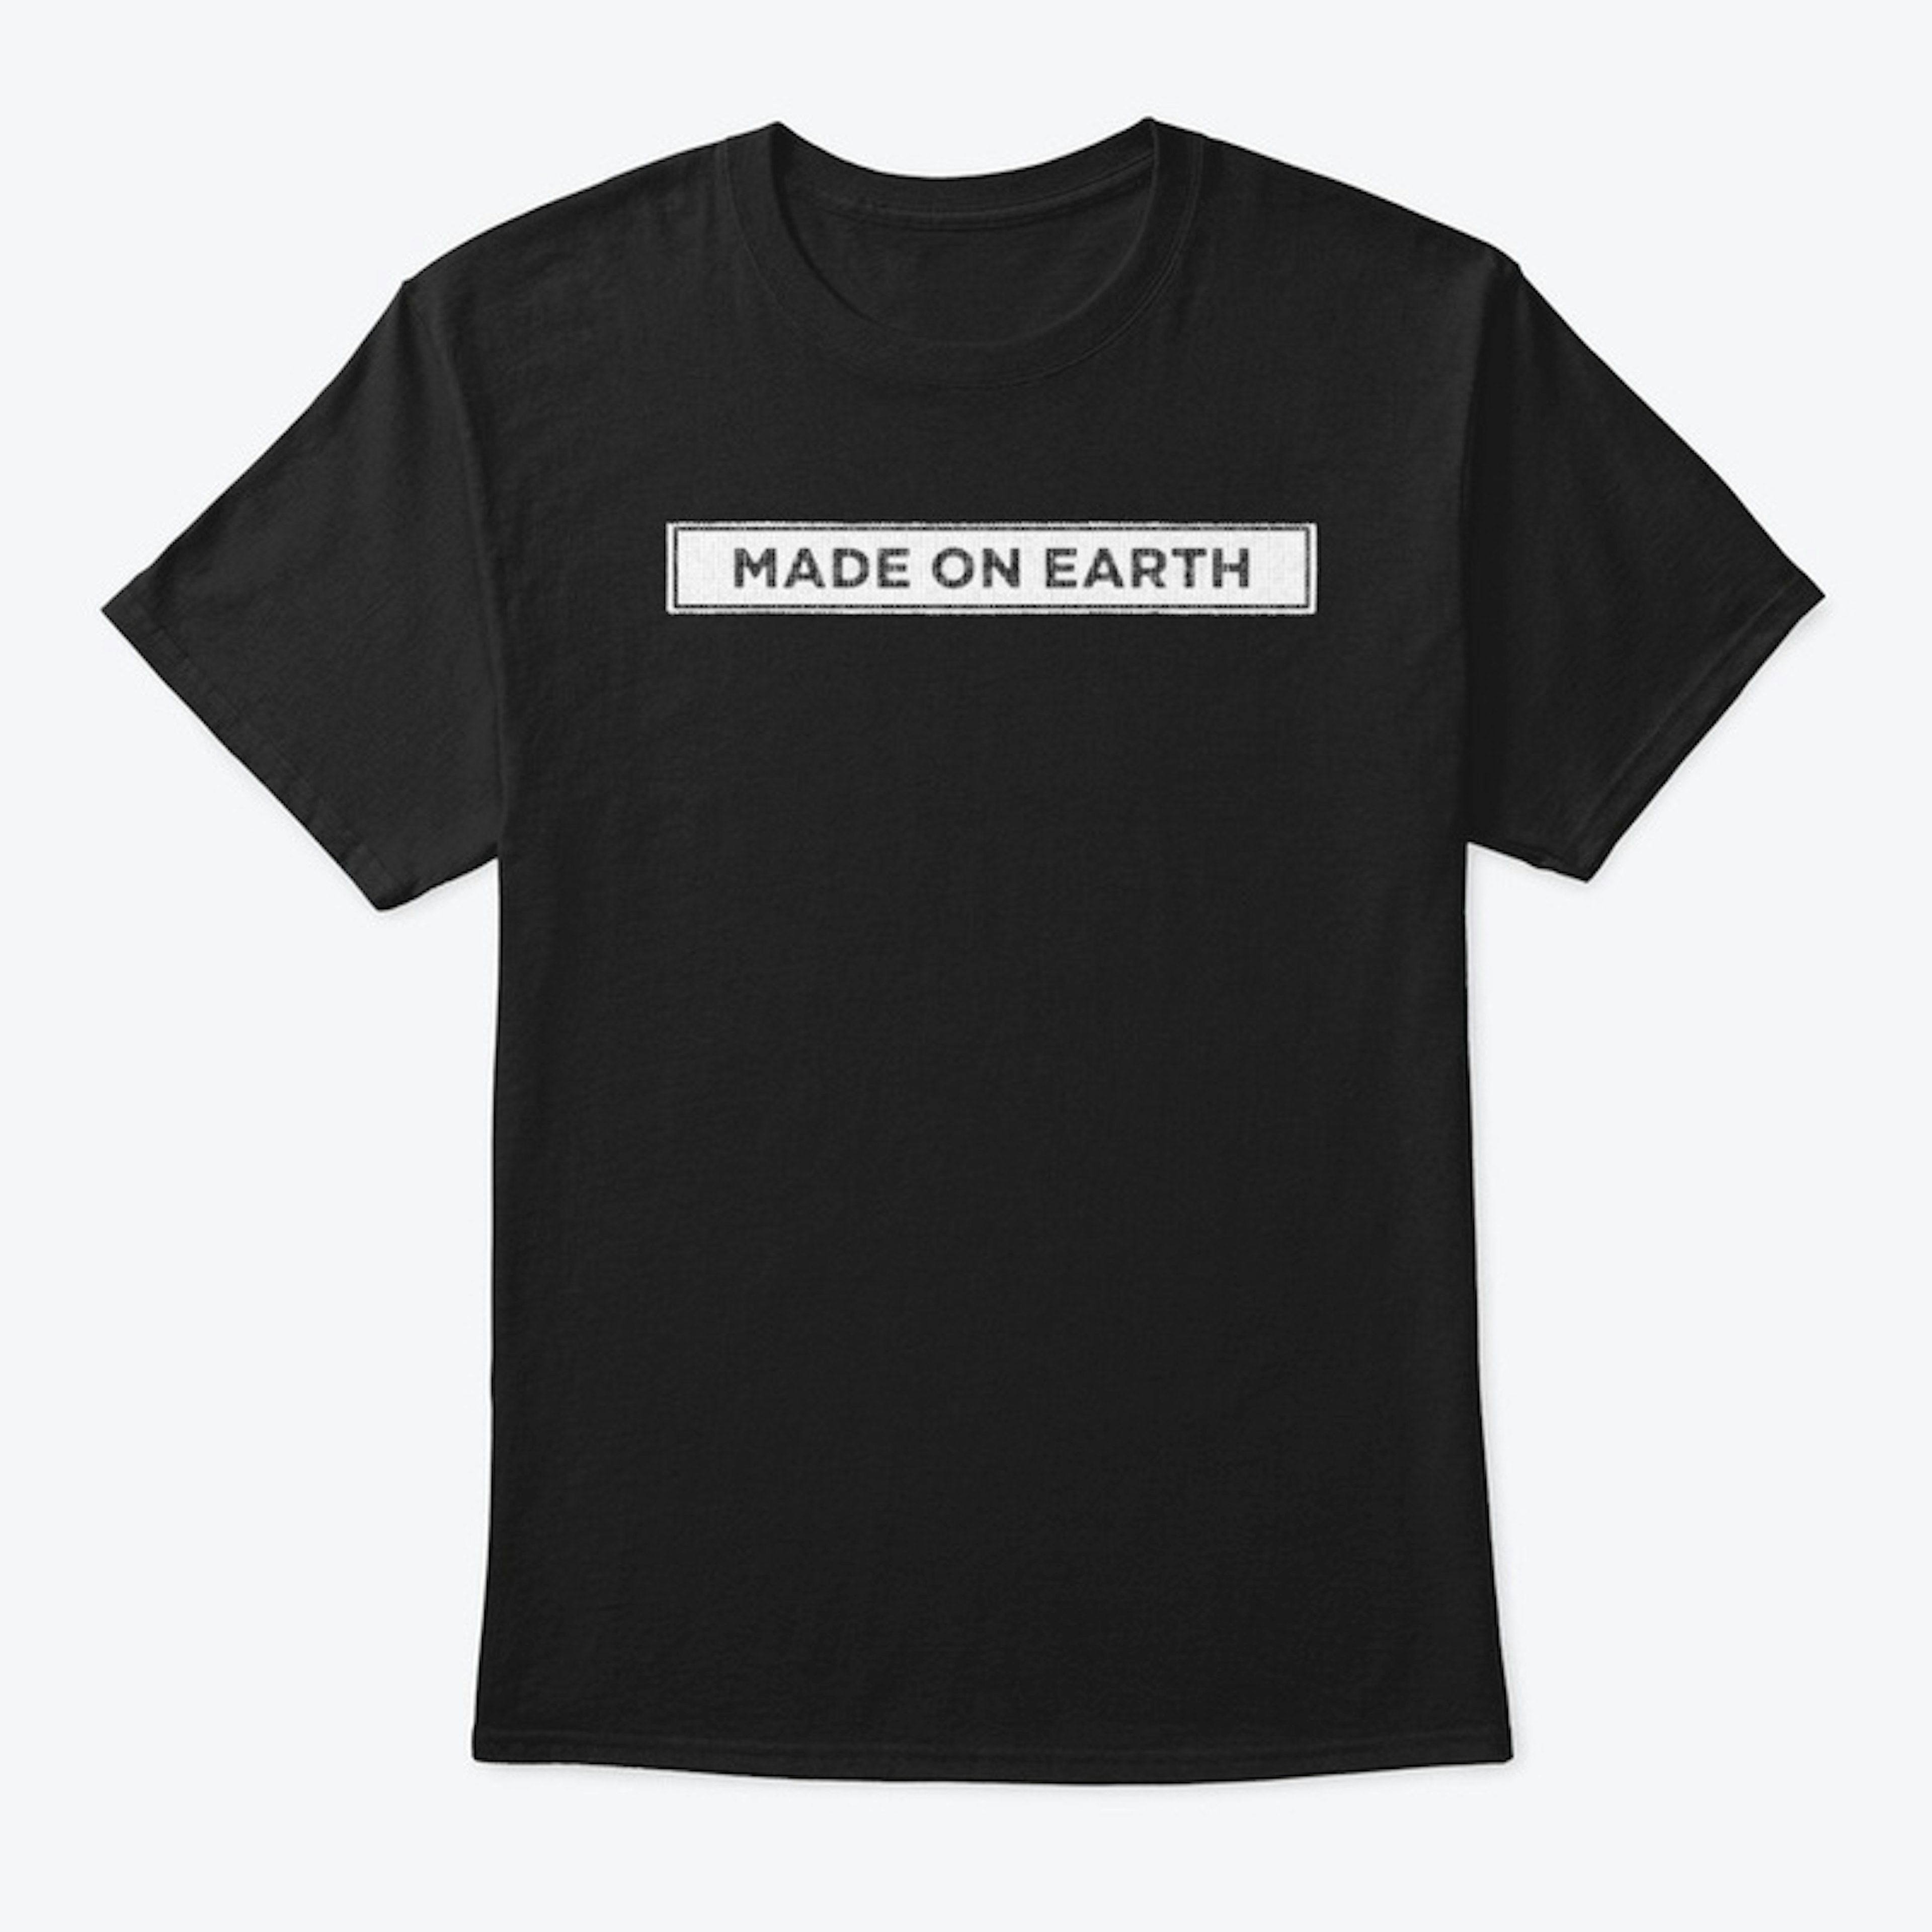 Made on Earth (white)